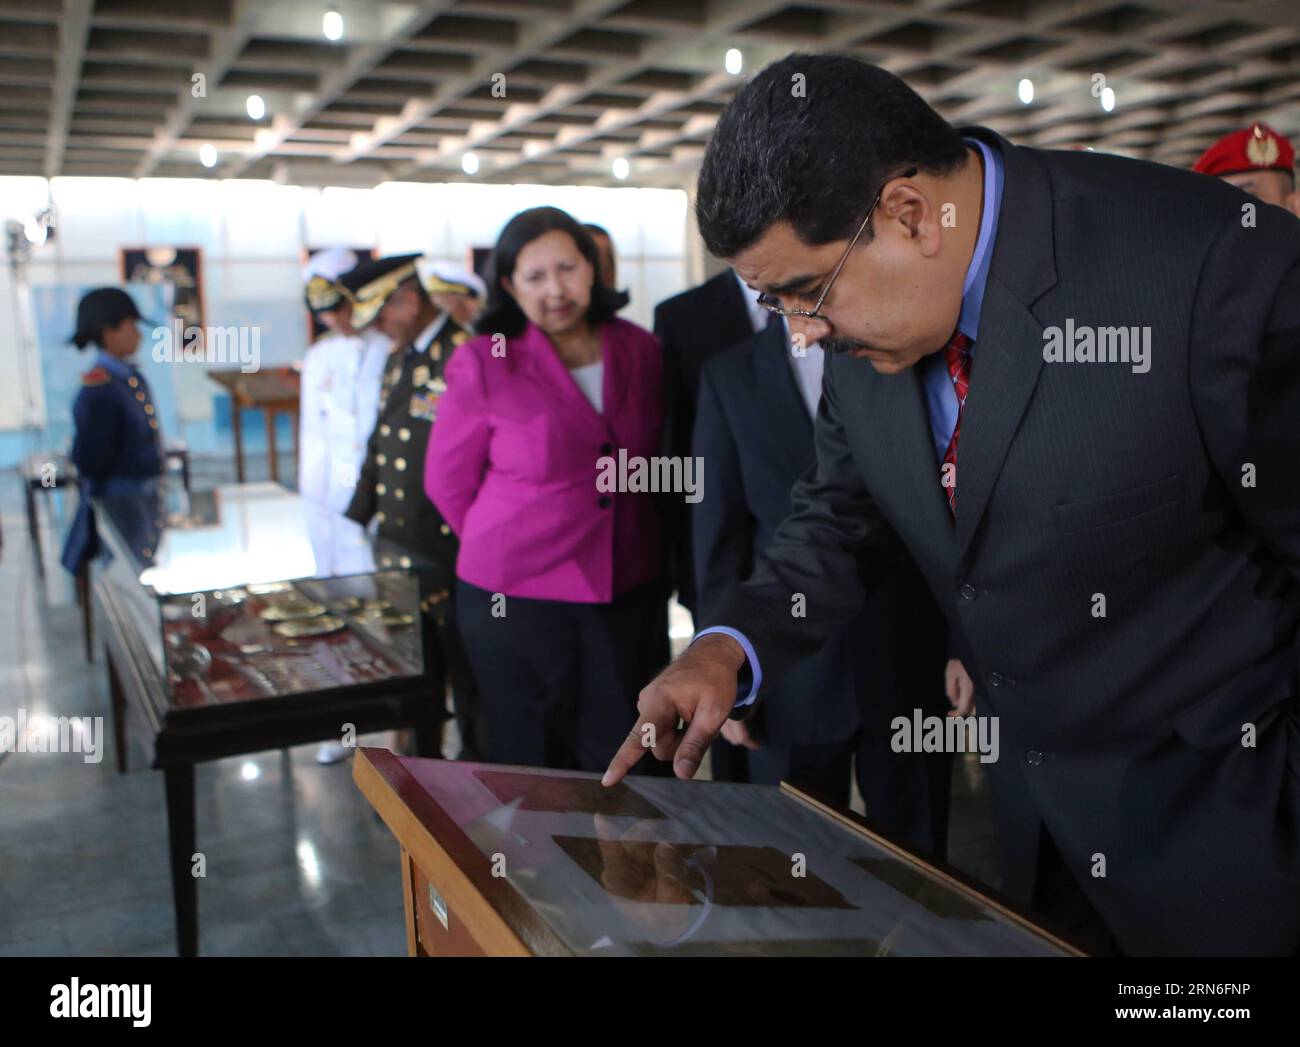 (150725) -- VARGAS,  - Image provided by shows Venezuelan President Nicolas Maduro (R) visiting the Ana Maria Campos Naval Base in commemoration of the 192th anniversary of the naval battle of Lake Maracaibo, in Catia La Mar, Vargas state, Venezuela, on July 24, 2015. ) VENEZUELA-VARGAS-POLITICS-MADURO VENEZUELA SxPRESIDENCY PUBLICATIONxNOTxINxCHN   150725 Vargas Image provided by Shows Venezuelan President Nicolas Maduro r Visiting The Ana Mary Campos Naval Base in Commemoration of The 192th Anniversary of The Naval Battle of Lake Maracaibo in Catia La Mar Vargas State Venezuela ON July 24 20 Stock Photo